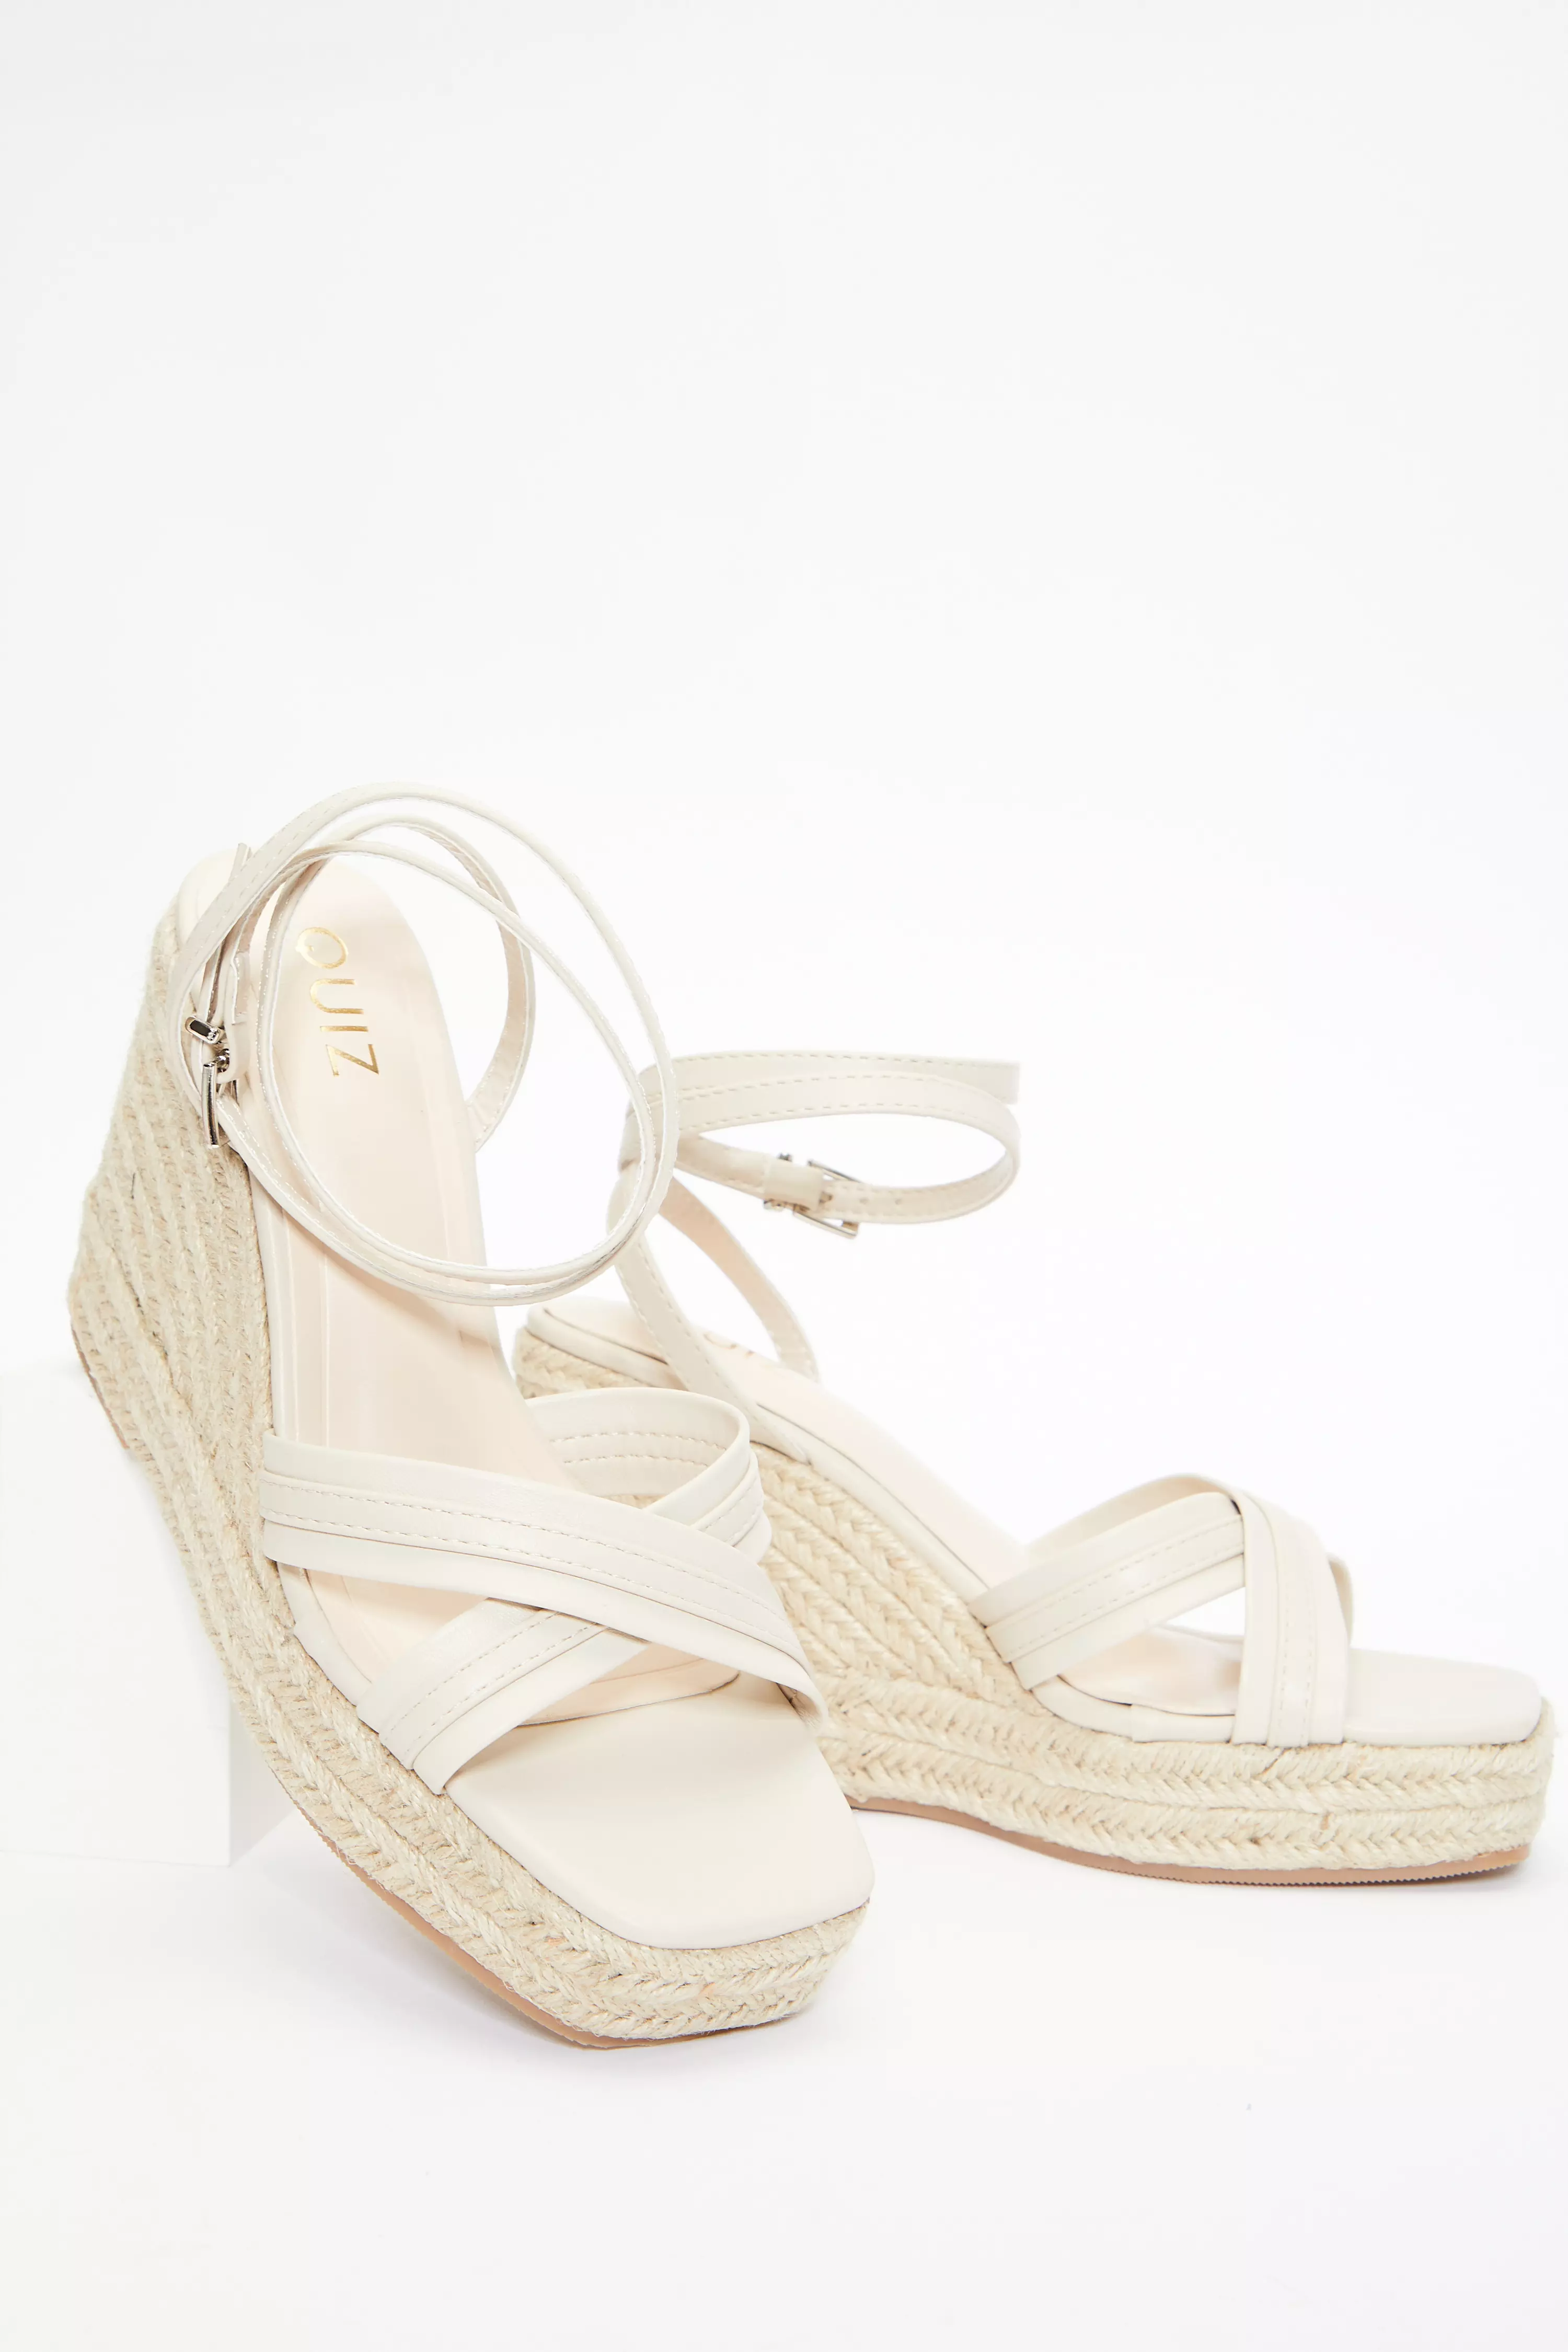 Nude Cross Strap Wedges